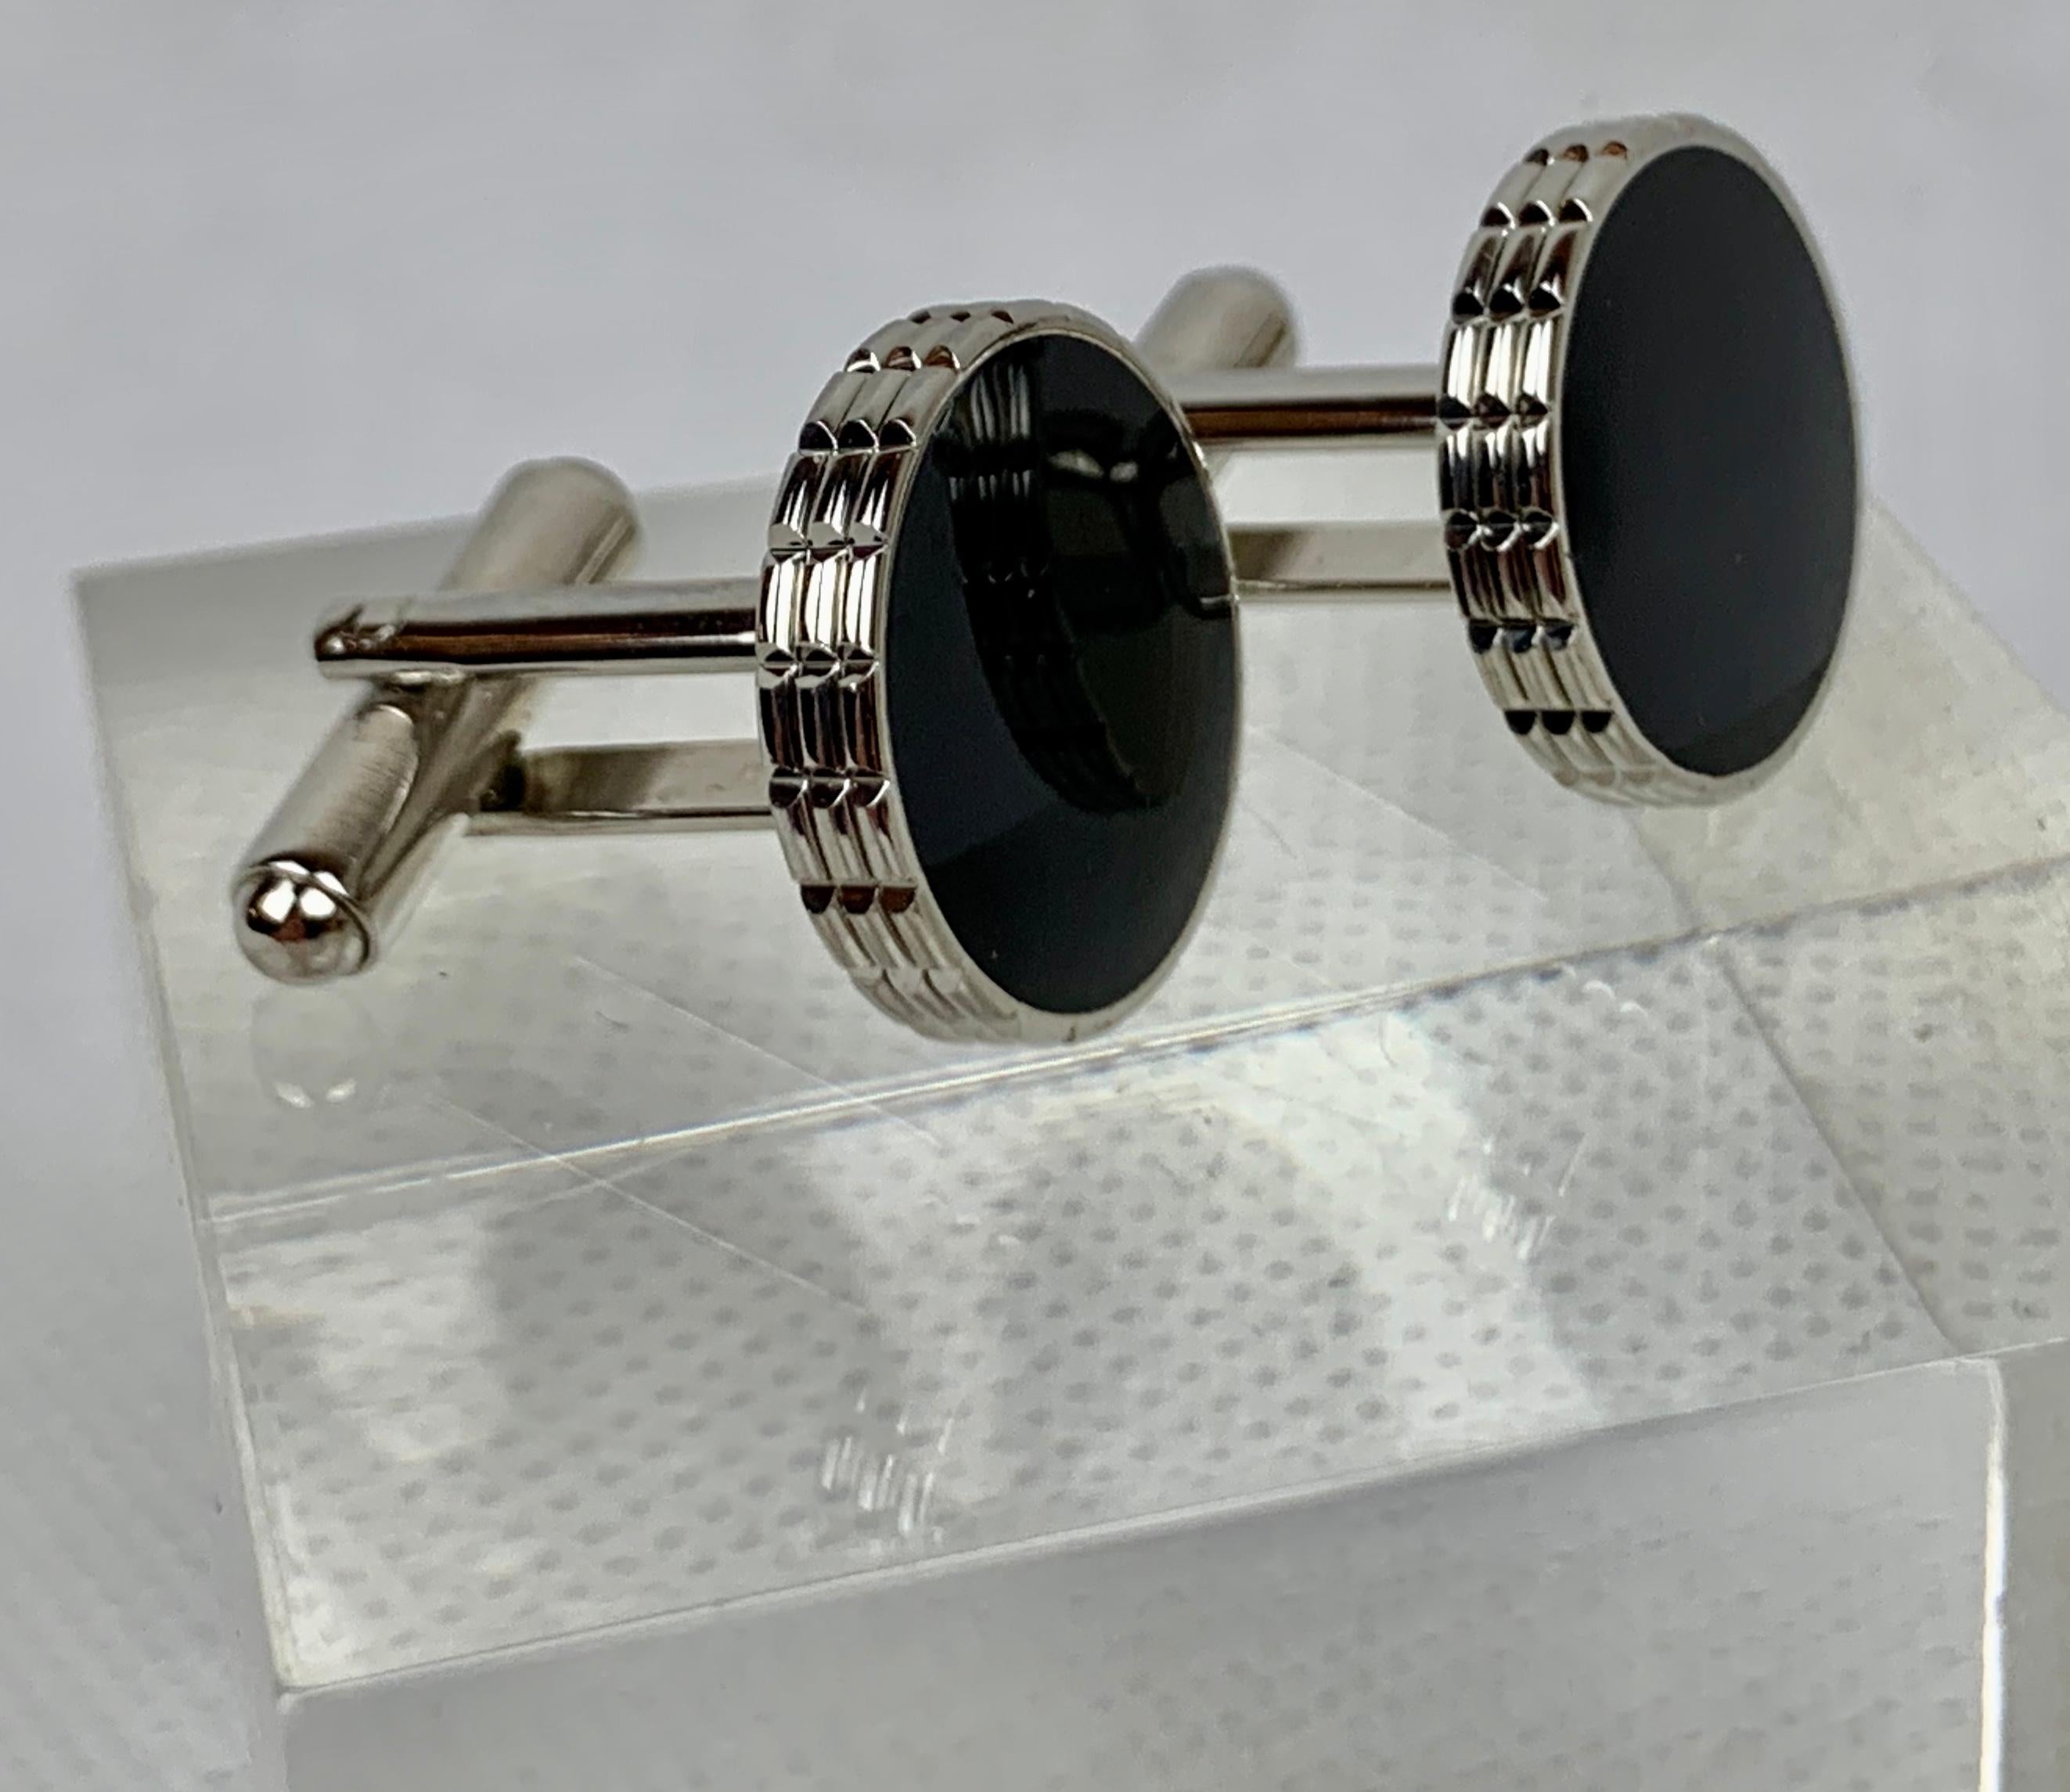 Women's or Men's A Pair of Round Cufflinks with Insets of Black Enamel-American, c. 1950's-60's For Sale